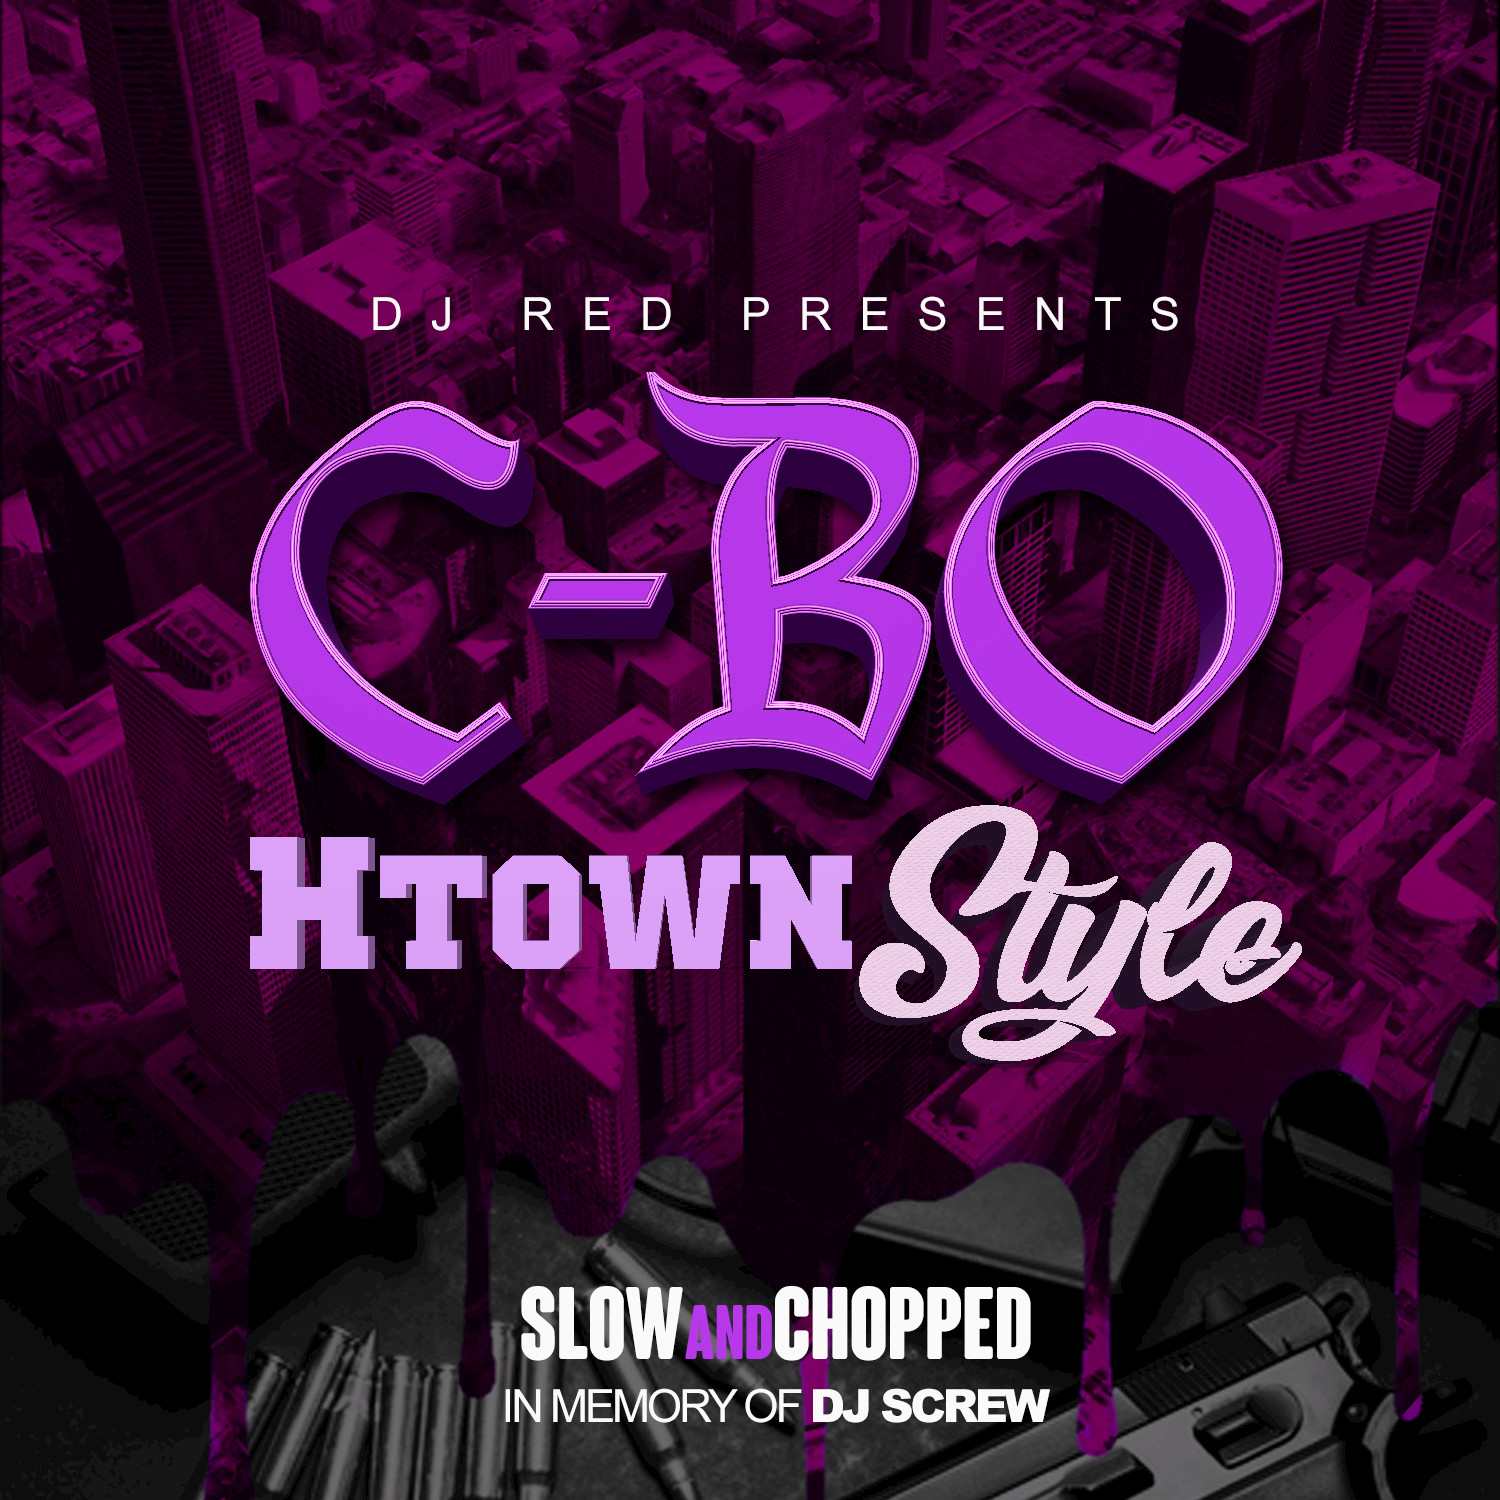 Dj Red Presents: C-BO Htown Style (Slow and Chopped)